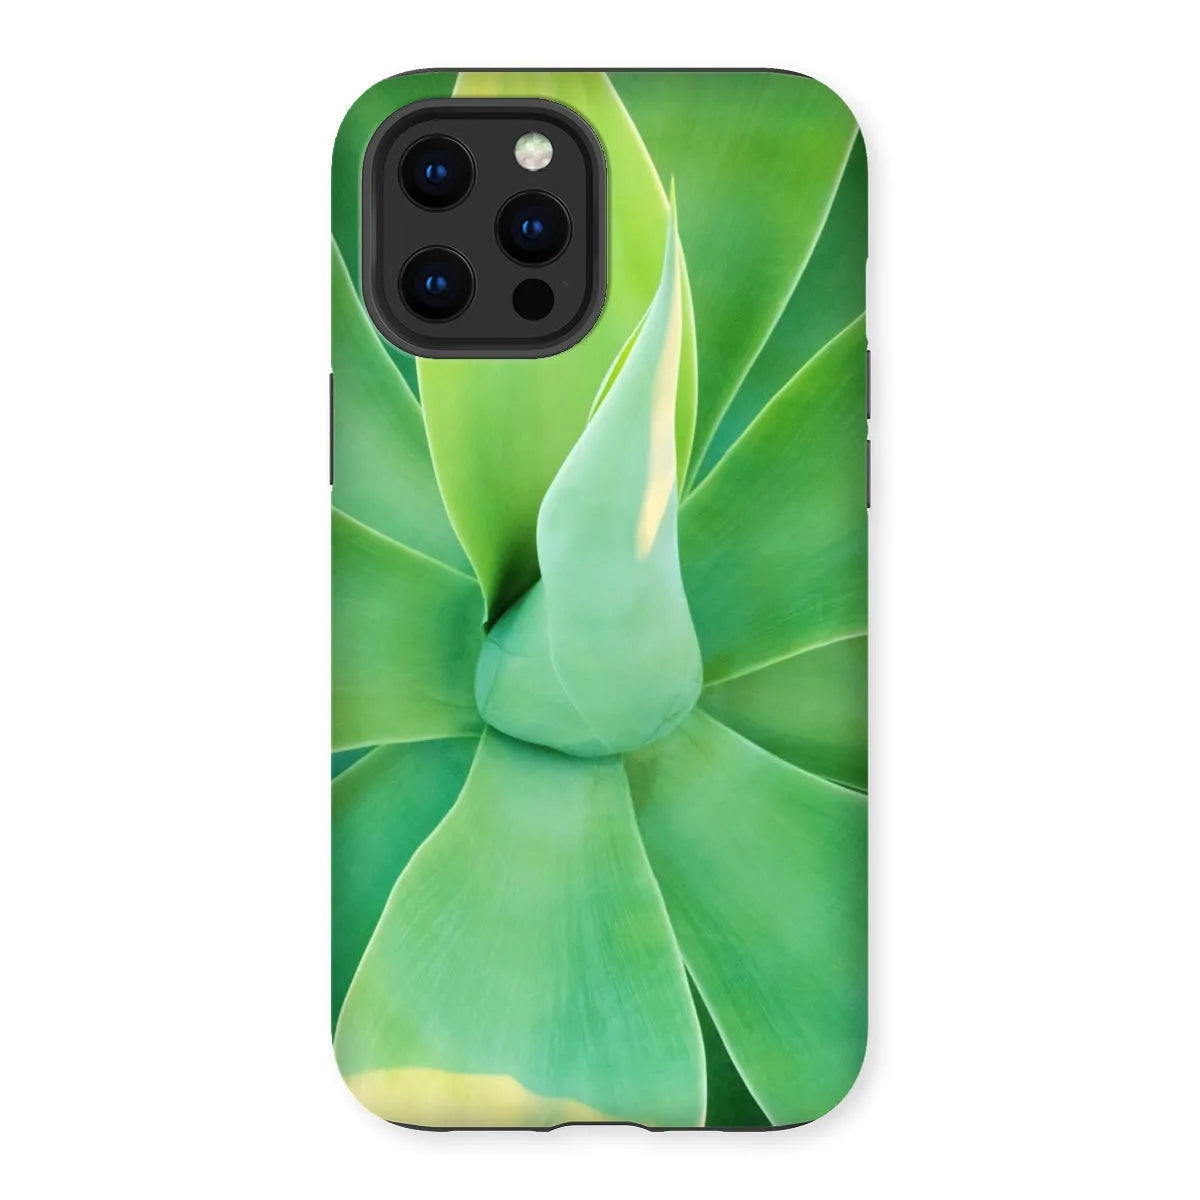 In Bloom Too Tough Phone Case - Iphone 12 Pro Max / Matte - Mobile Phone Cases - Aesthetic Art